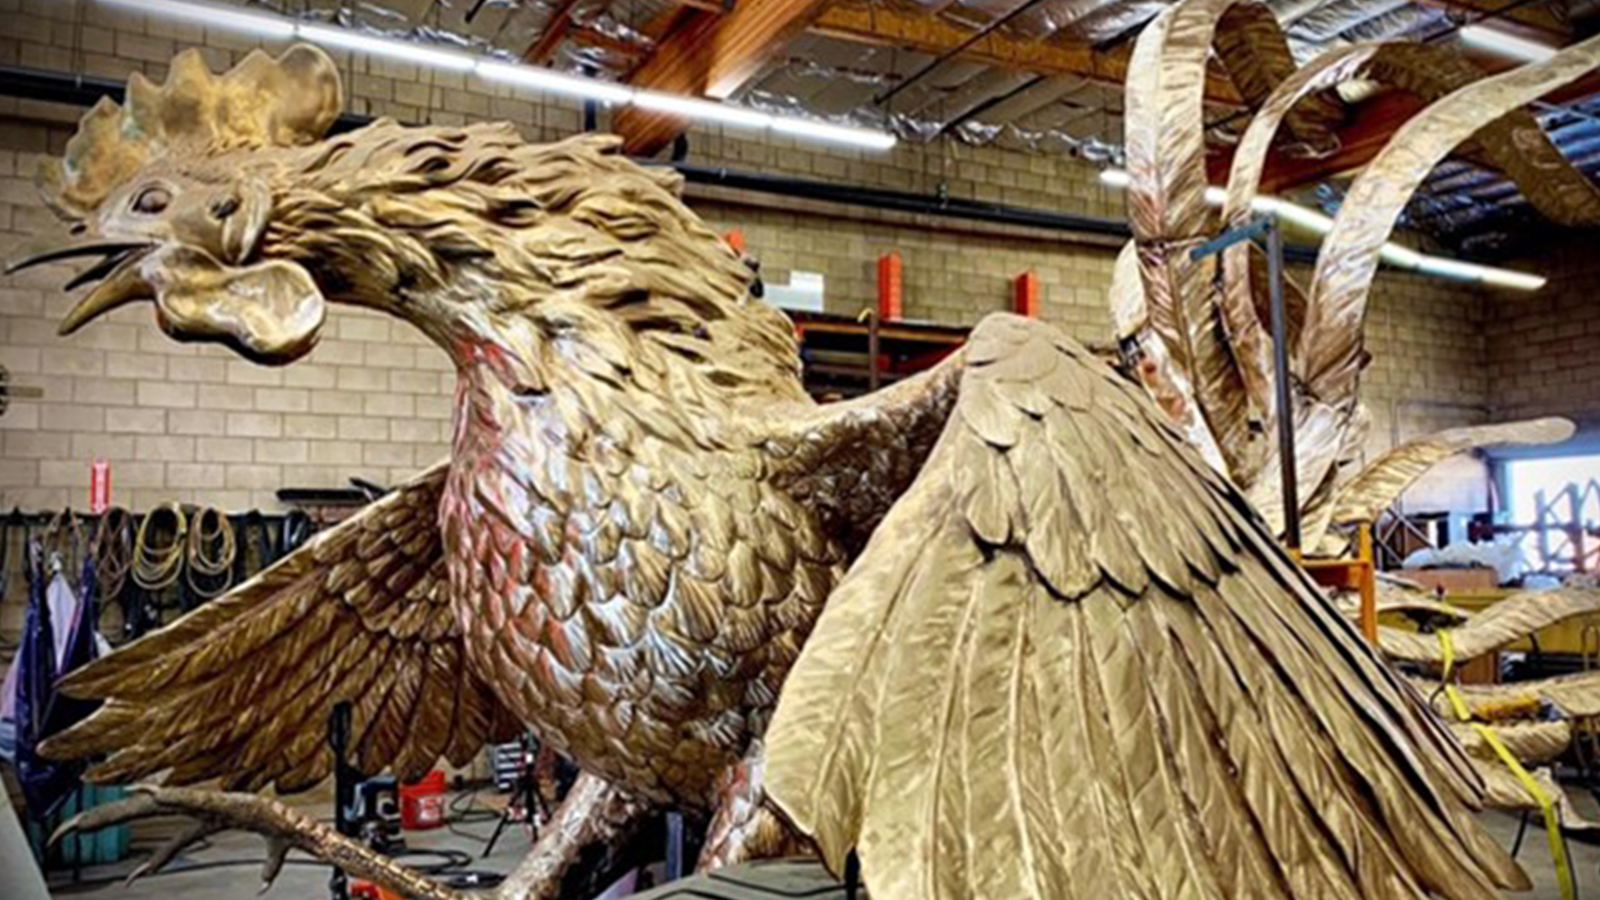 Massive Privately Funded Gamecock Sculpture Ready for Williams-Brice Stadium